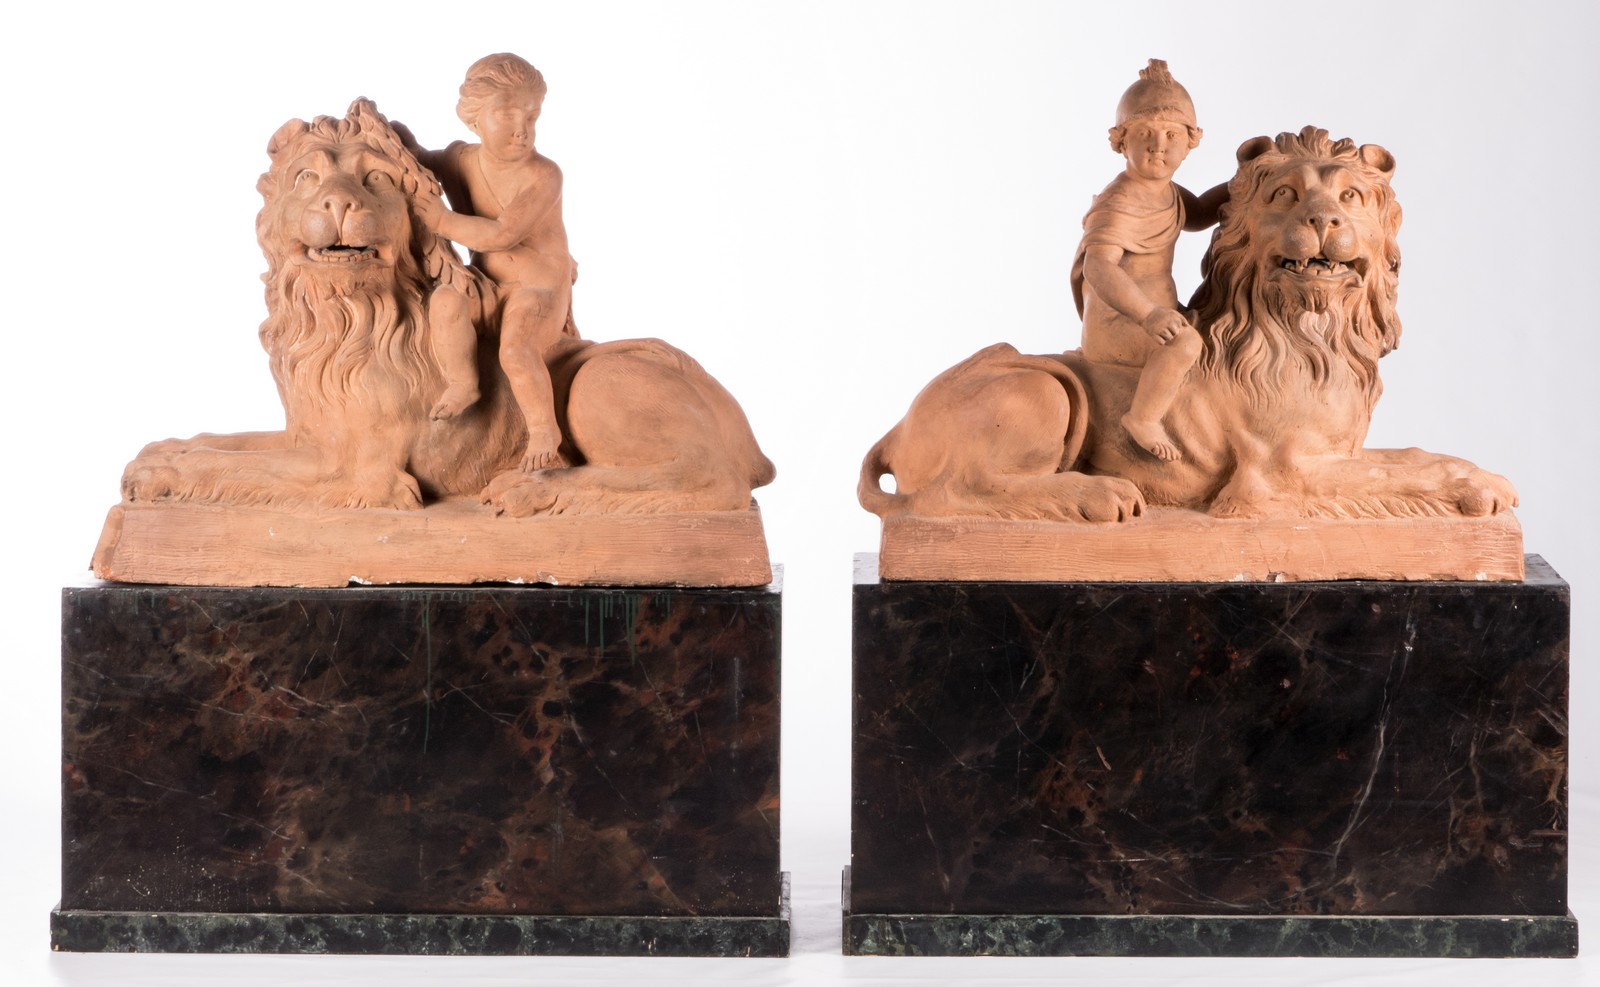 A large pair of terracotta sculptures depicting an allegoric scene, 19thC, H 78 - B 97 - D 35 cm - Image 2 of 62